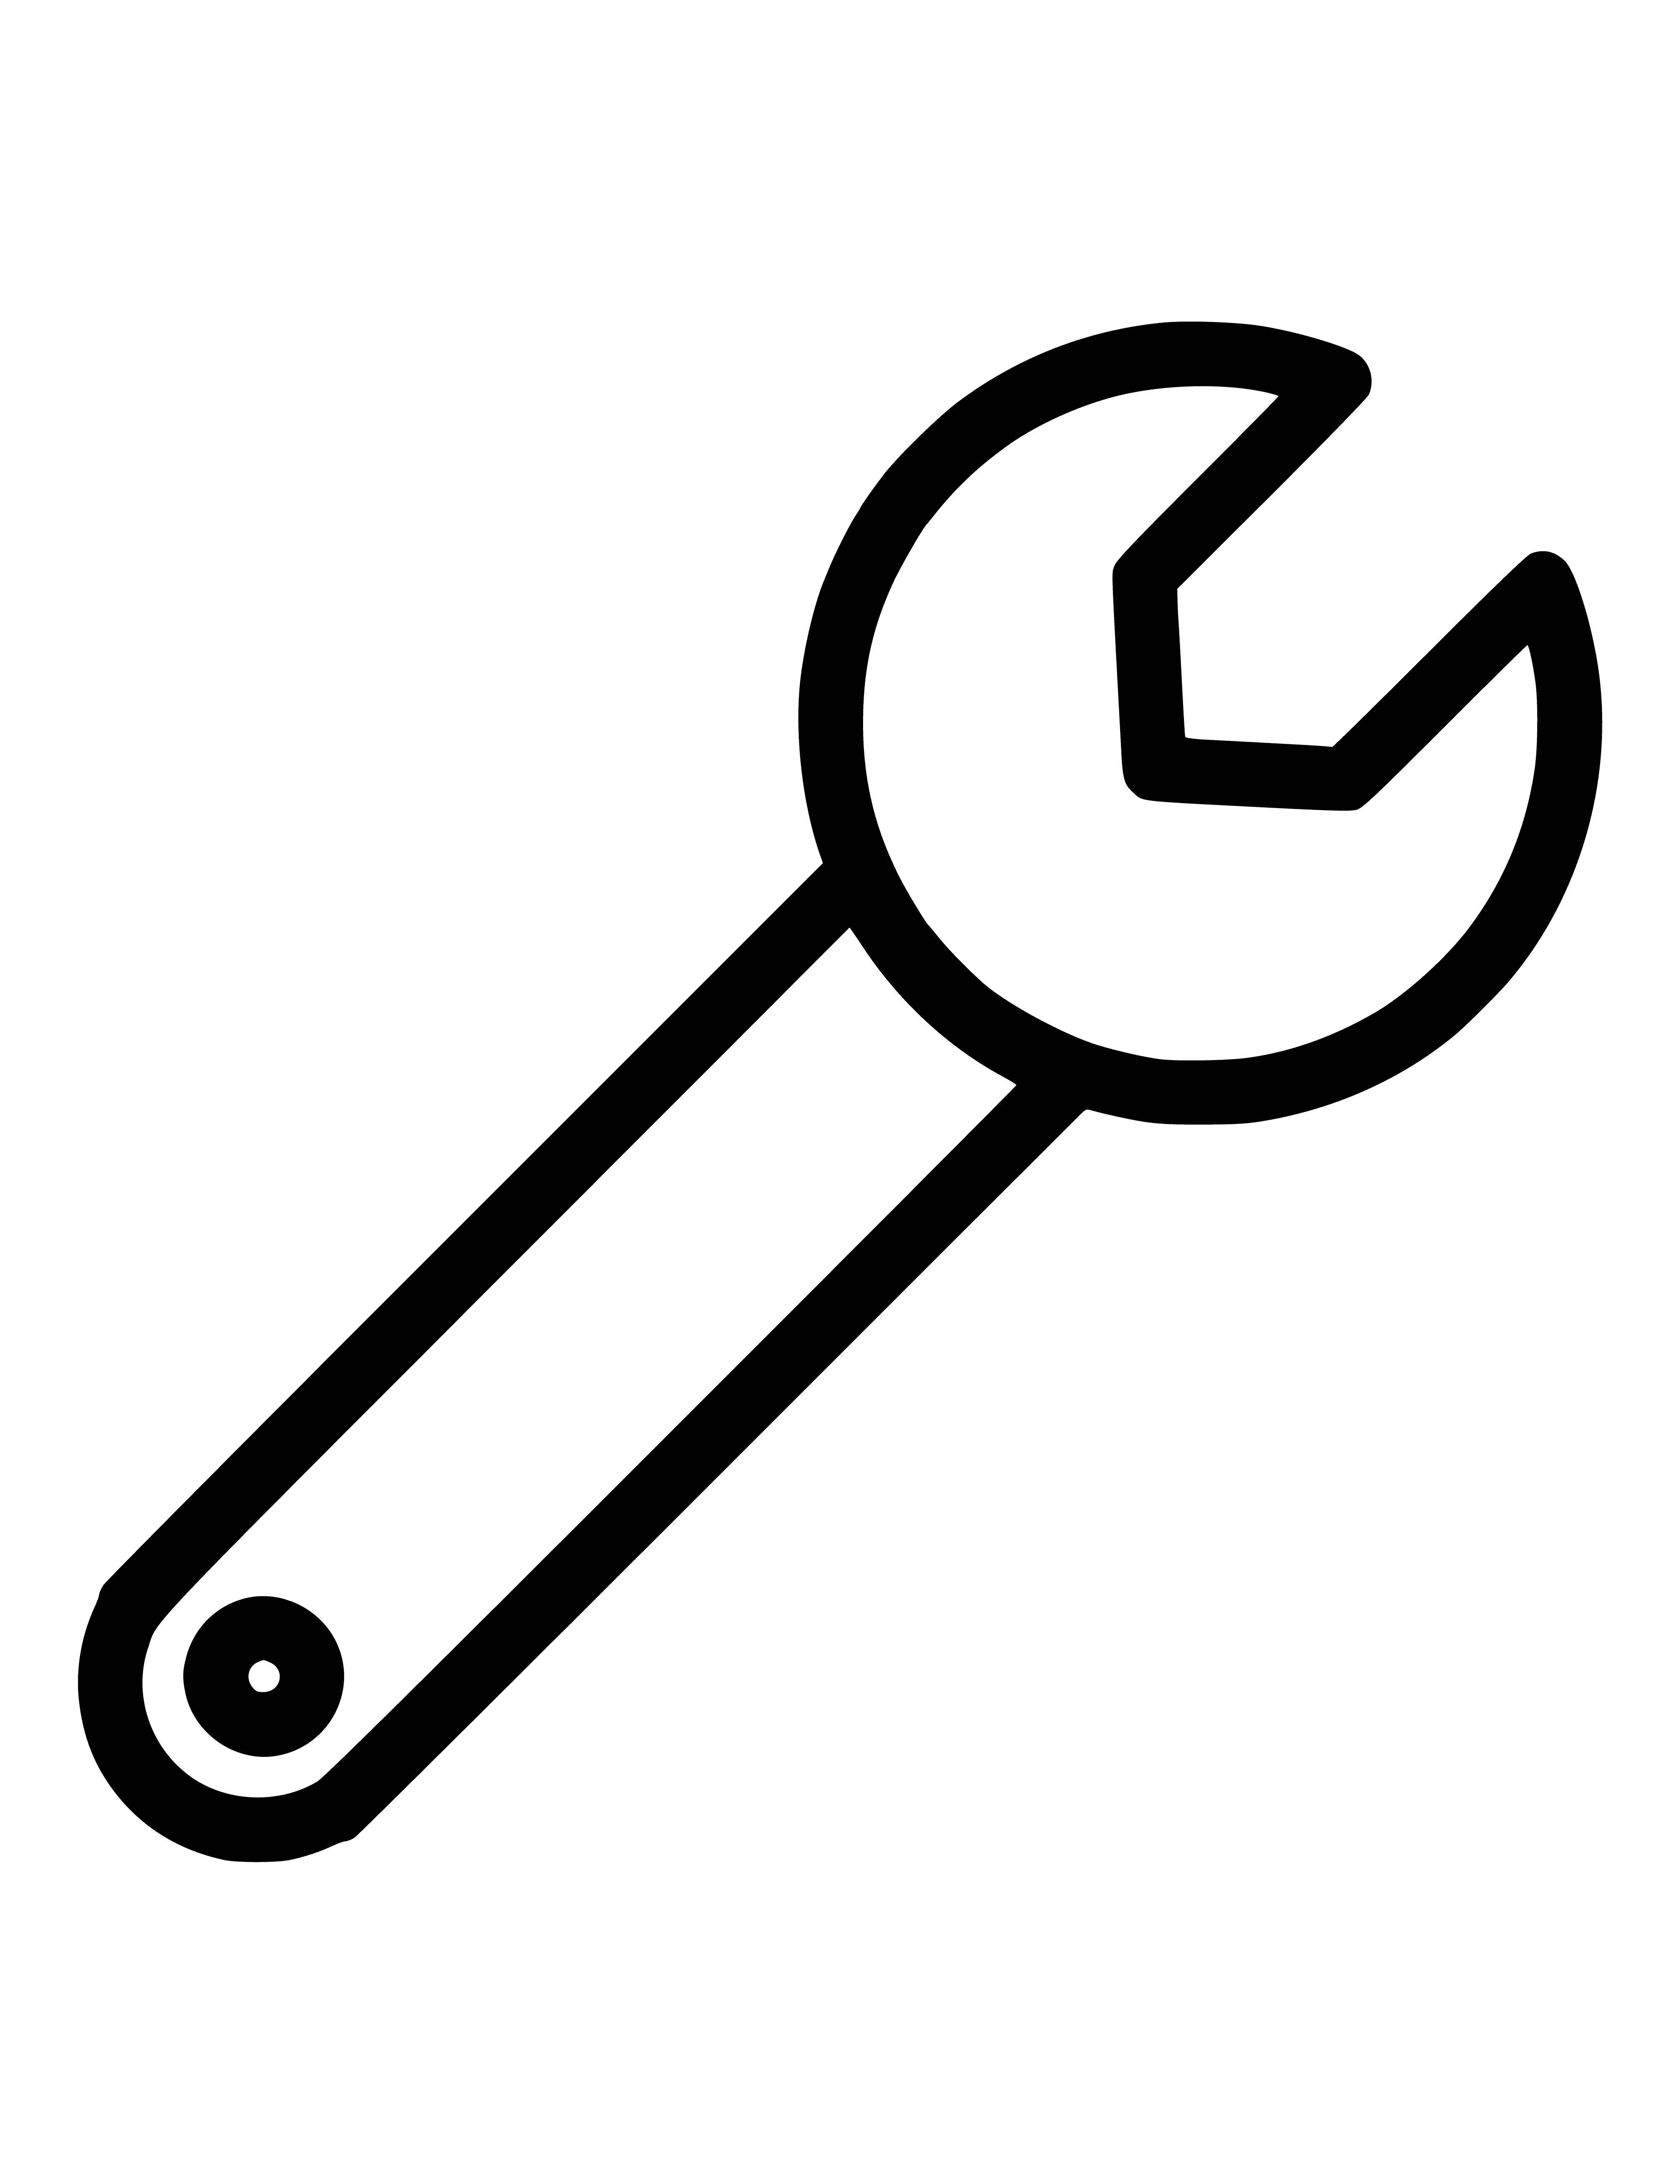 coloring page: Metal wrench long handle small head: grip holds, other end small opening turns screws/objects.